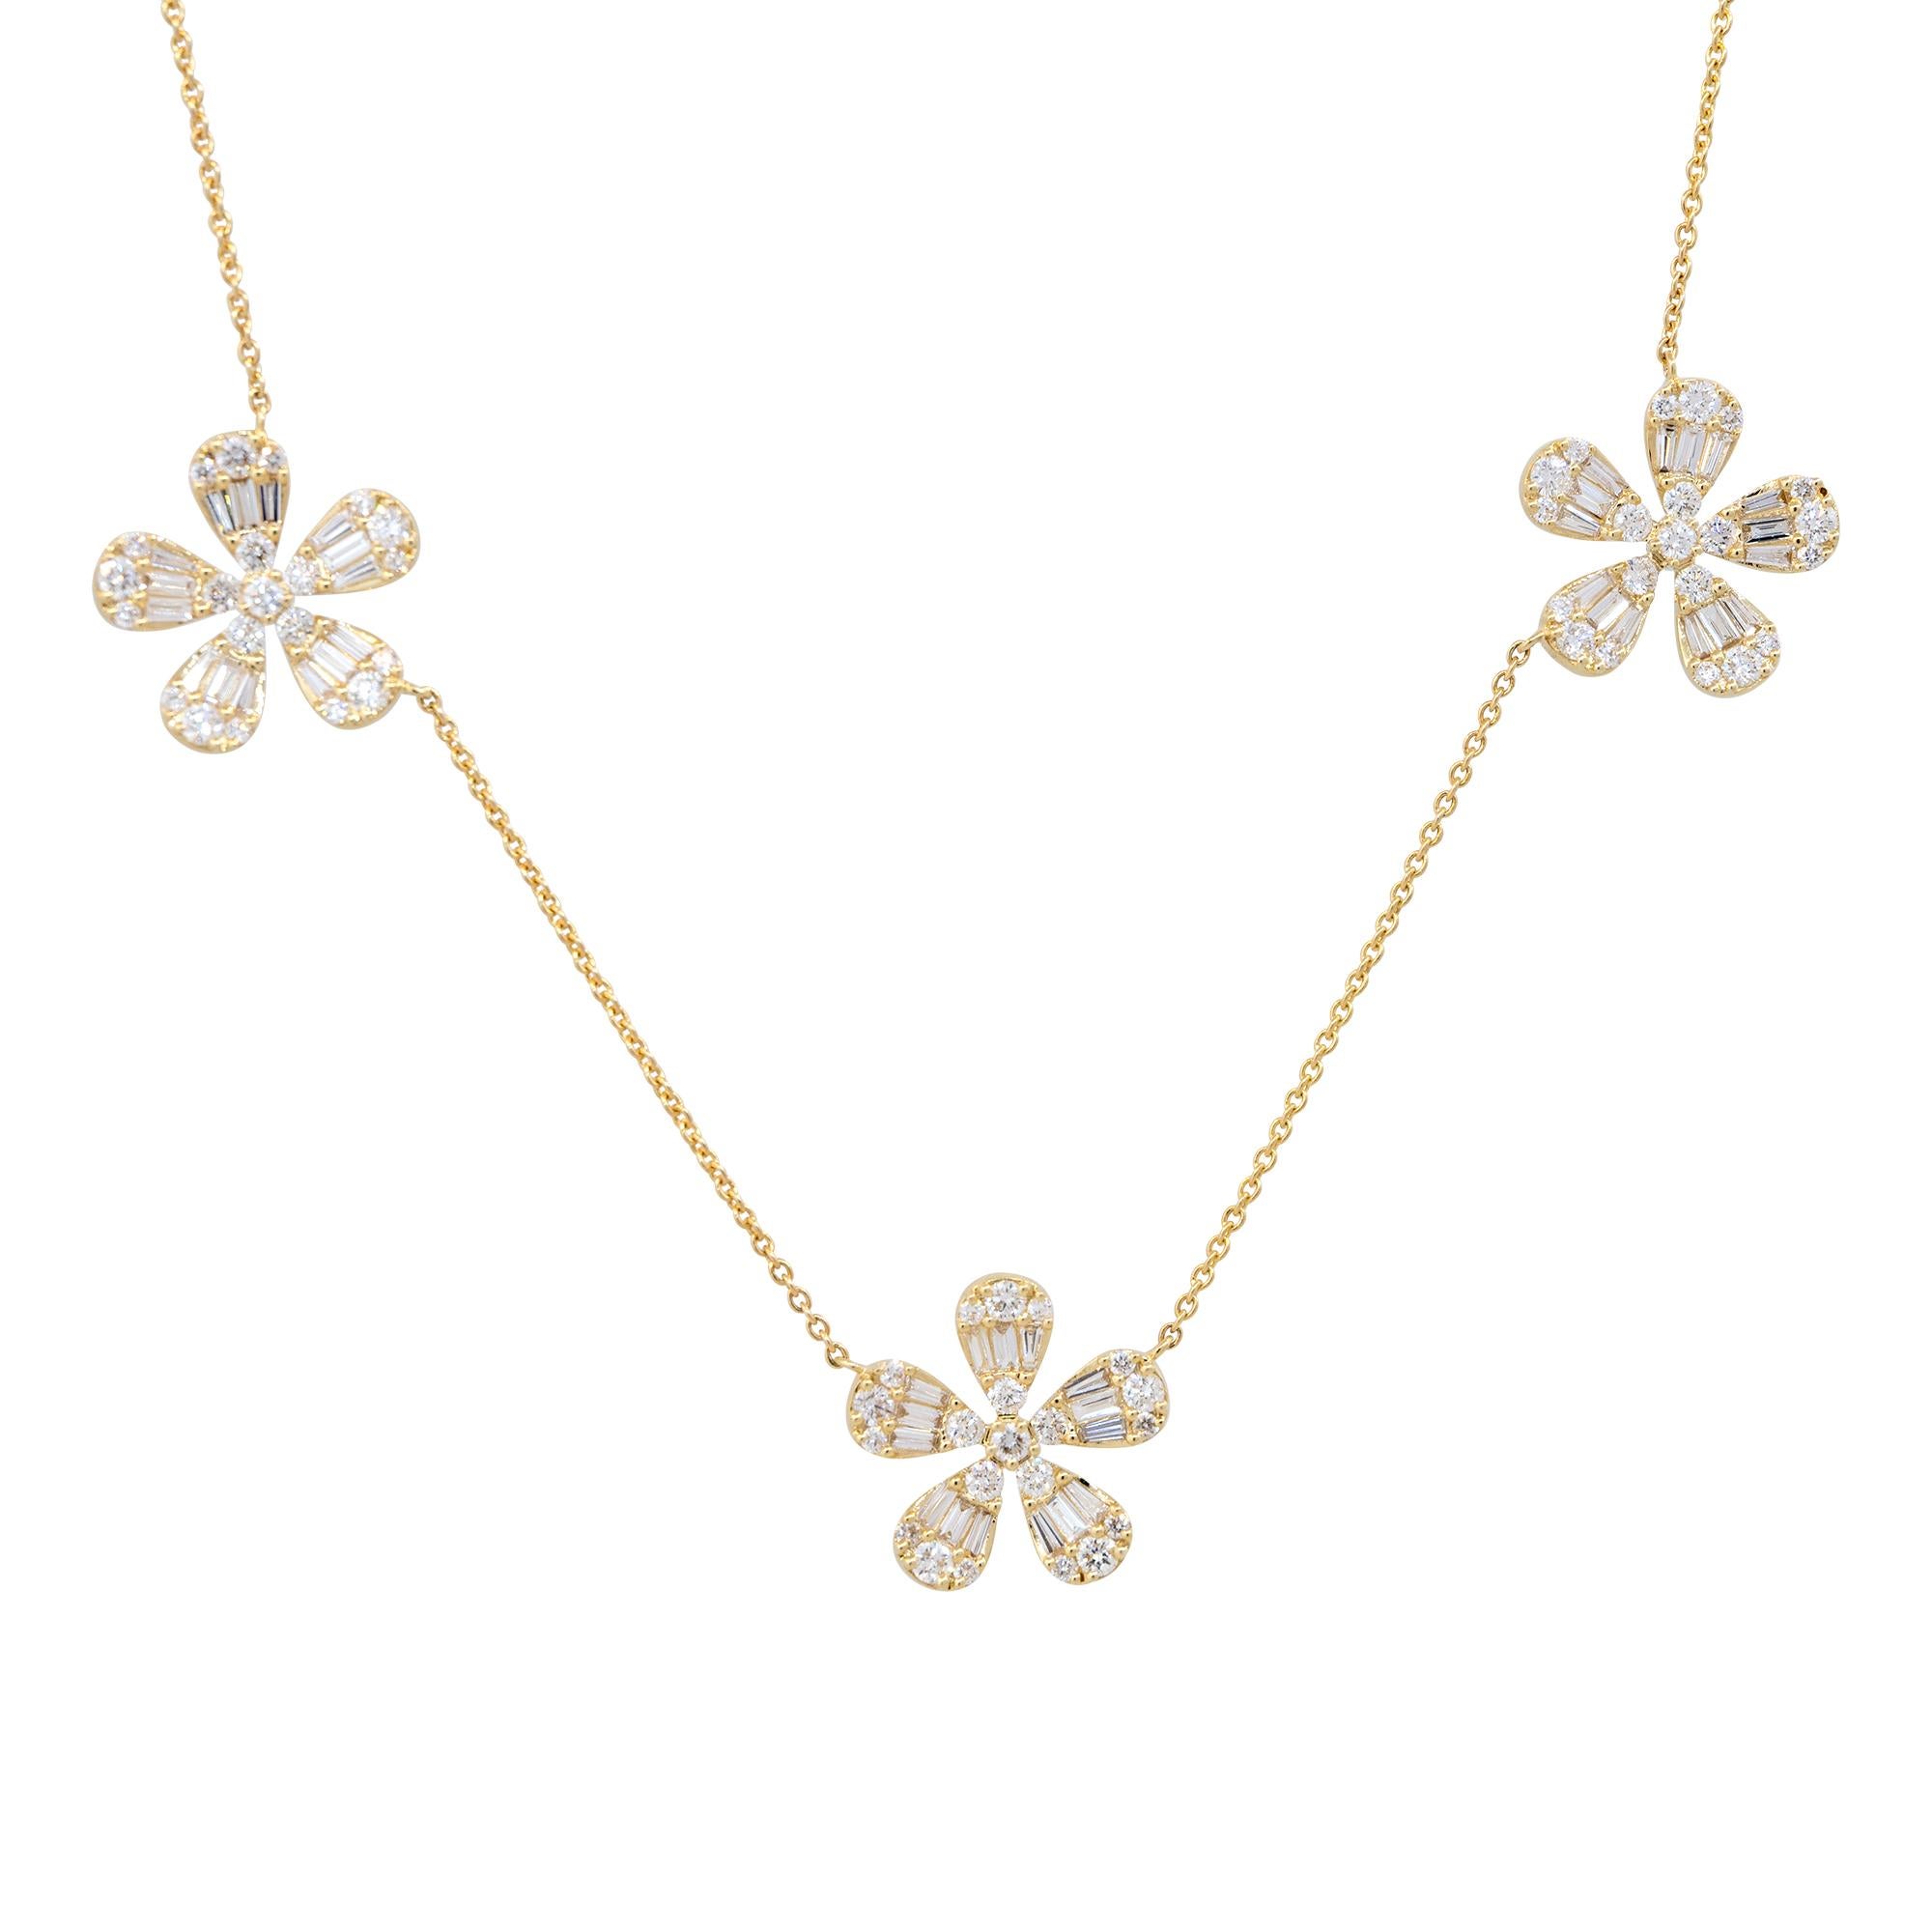 18k Yellow Gold 3.50ctw Pave Diamond 5 Flower Necklace
Material: 18k Yellow Gold
Diamond Details: There are approximately 3.50 carats of Round Brilliant and Baguette cut Diamonds. All diamonds are approximately G/H in color and approximately SI in